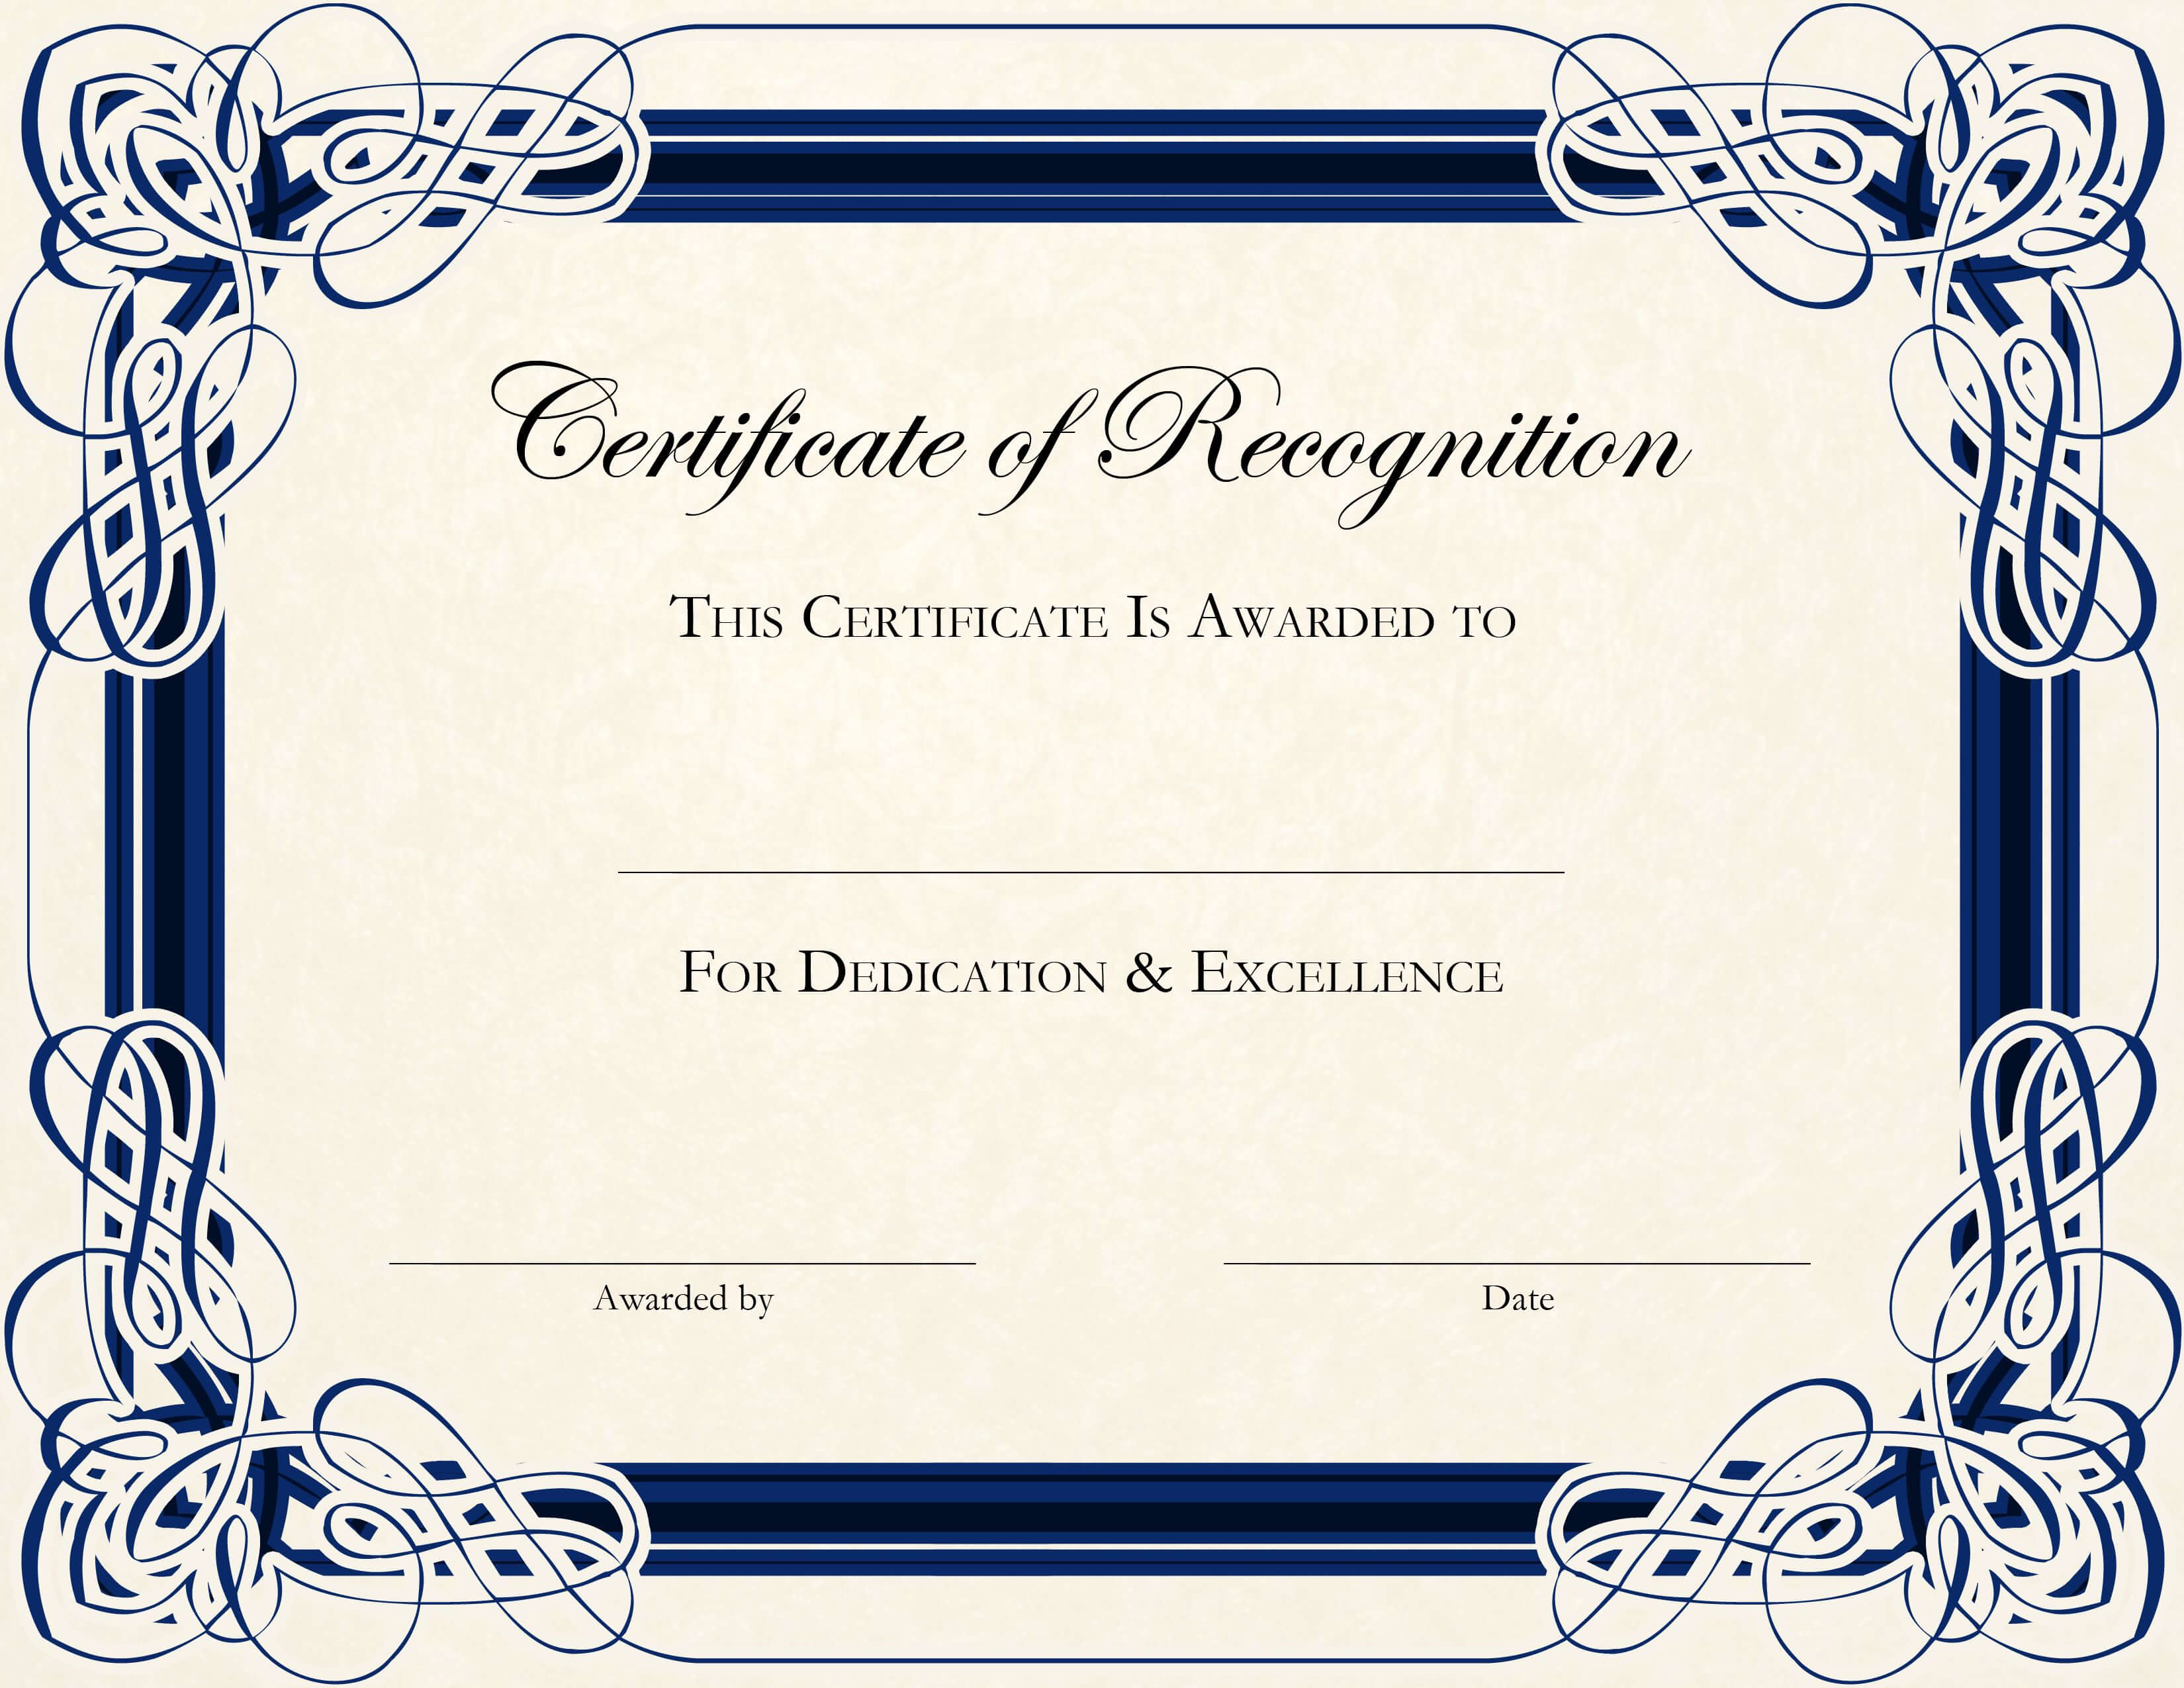 Certificate Template Designs Recognition Docs | Blankets Pertaining To Certificate Of Appreciation Template Doc